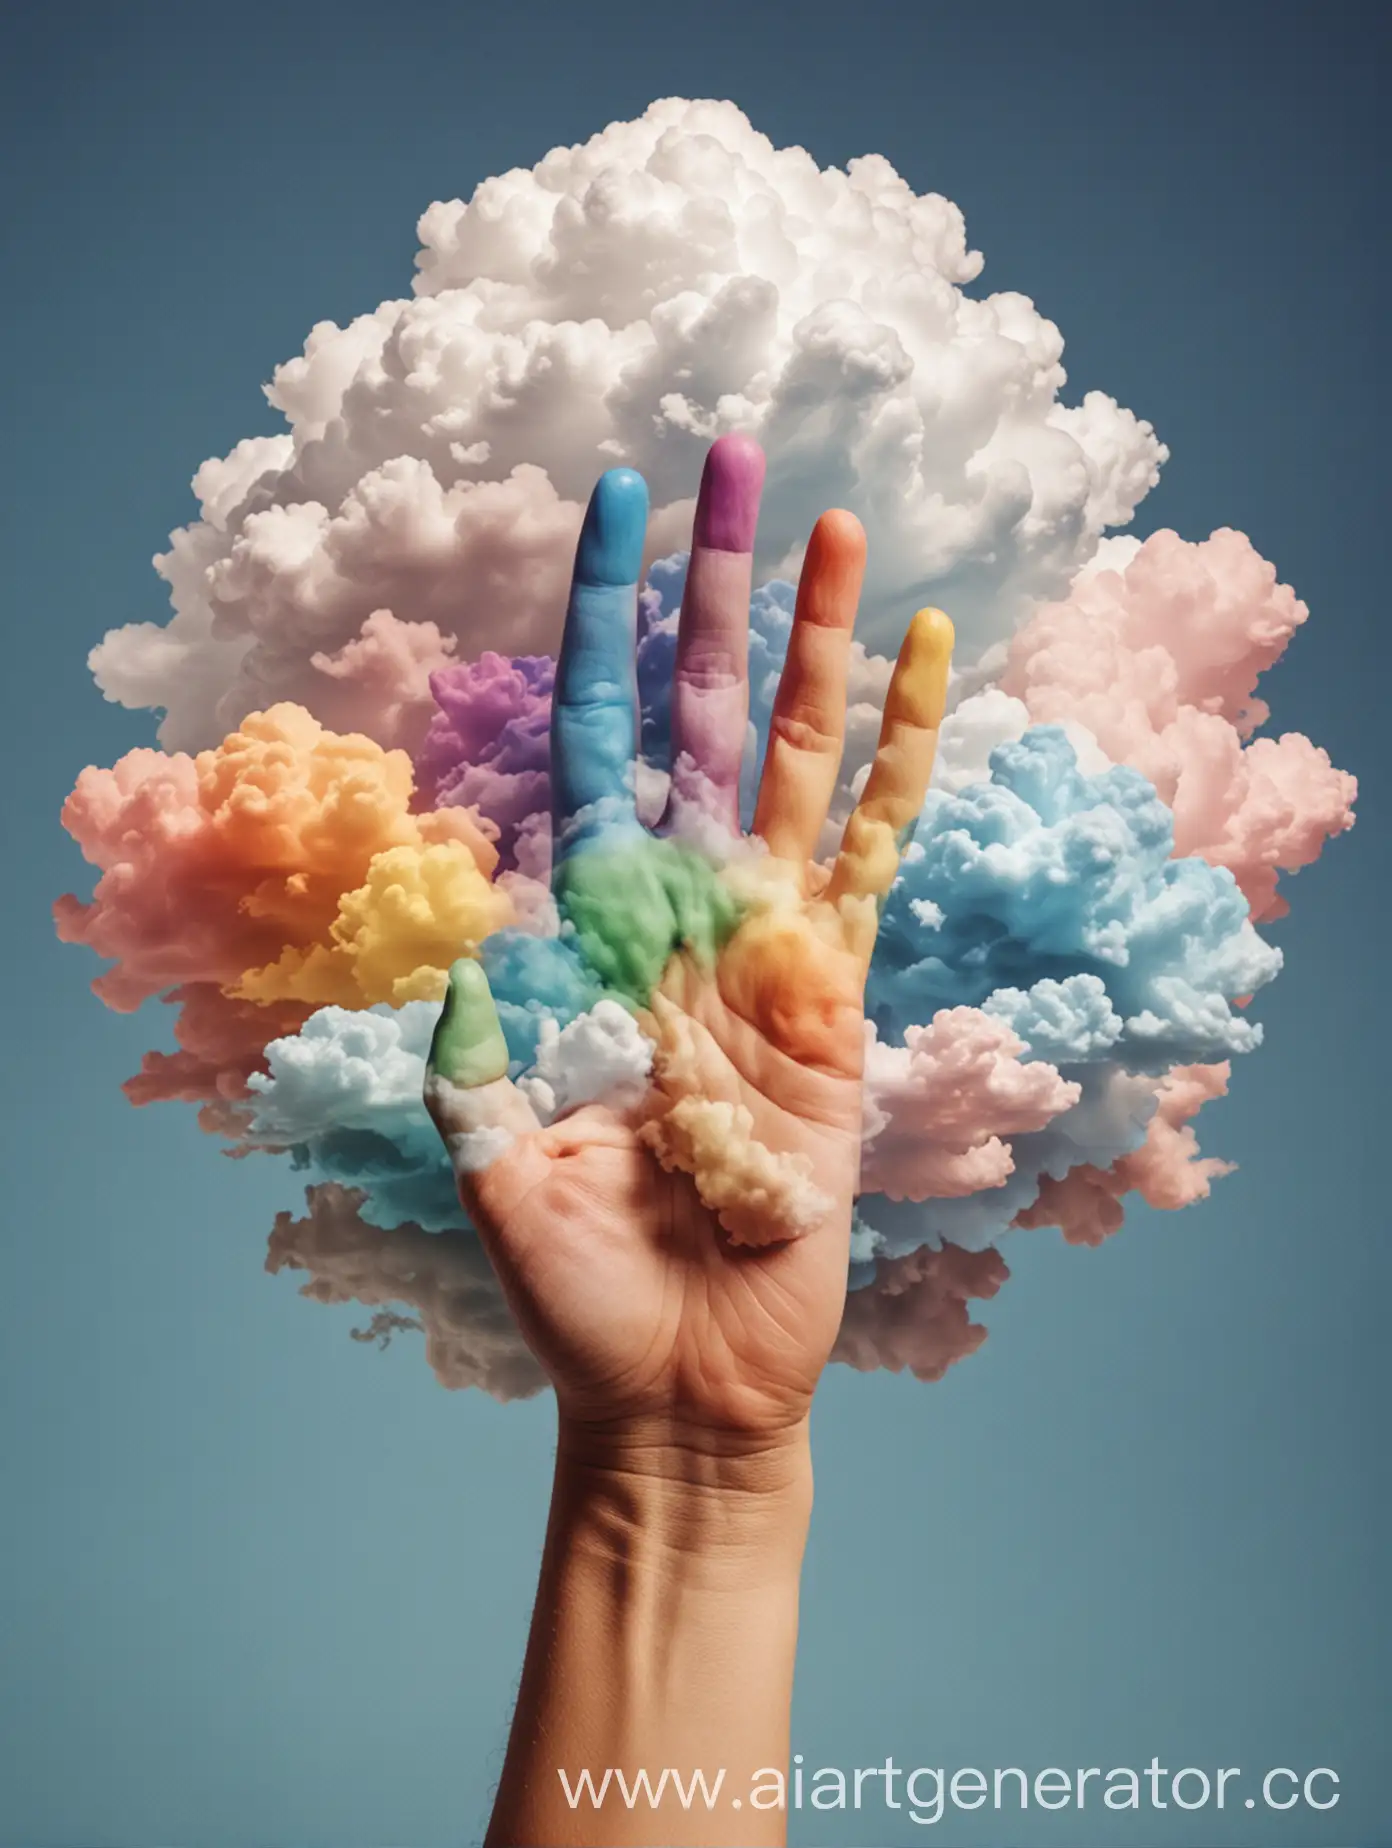 Colorful-Clouds-Grasped-by-Hand-Captivating-Artwork-of-Multicolored-Clouds-Held-by-Fingers